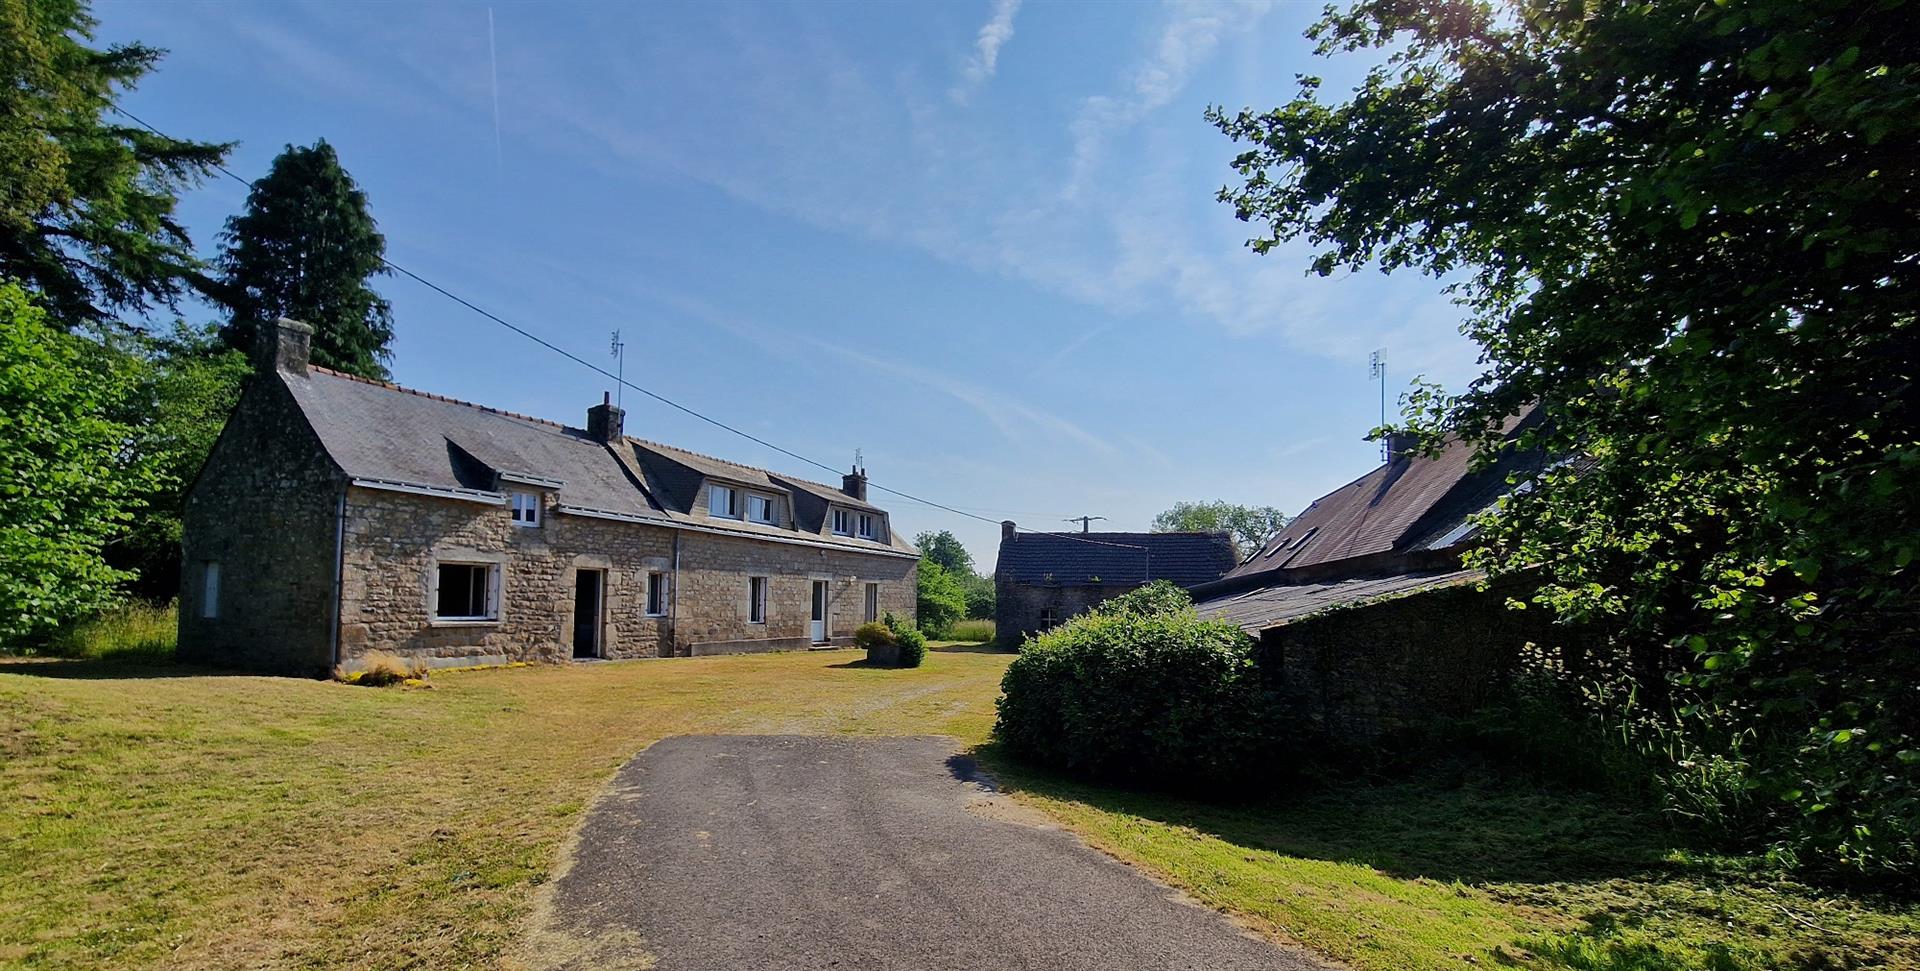 Old stone farmhouse to renovate (3 houses + outbuildings) on a plot of land